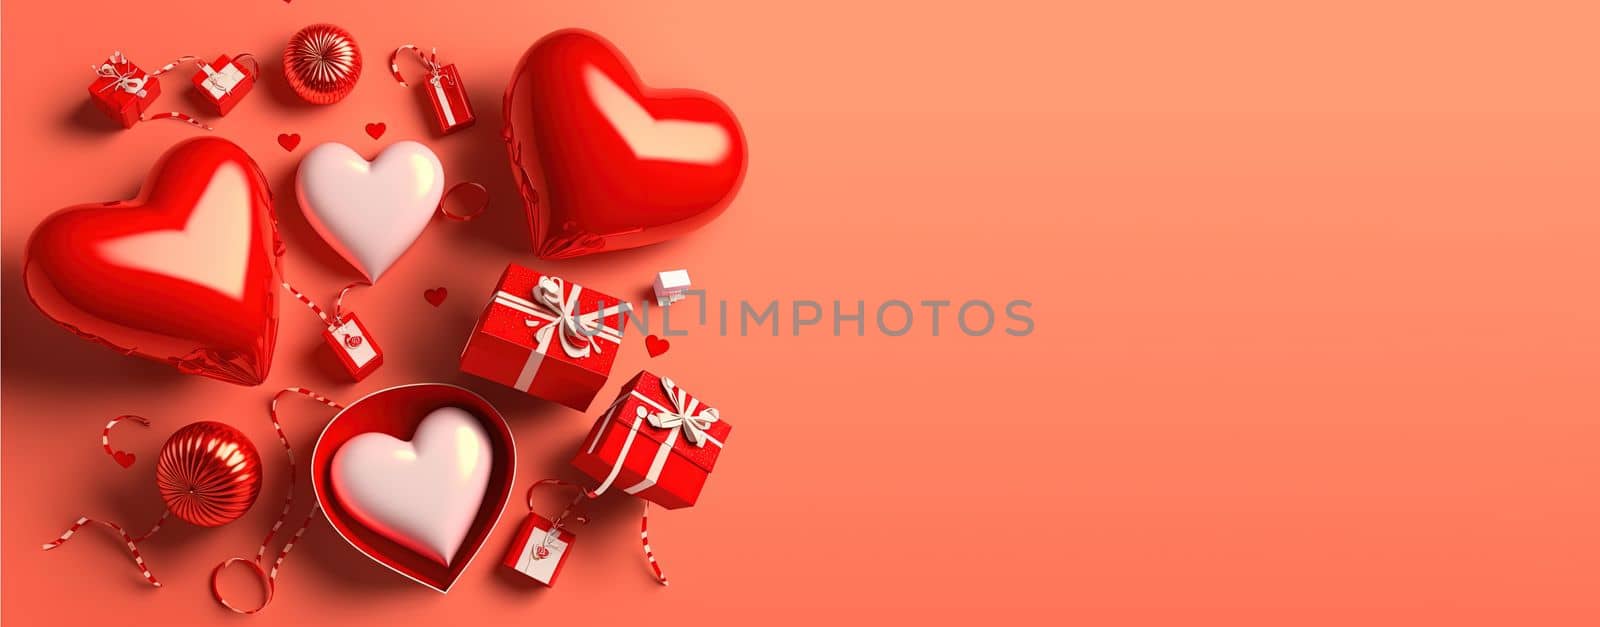 3D heart in red on a cheerful Valentine's Day banner by templator